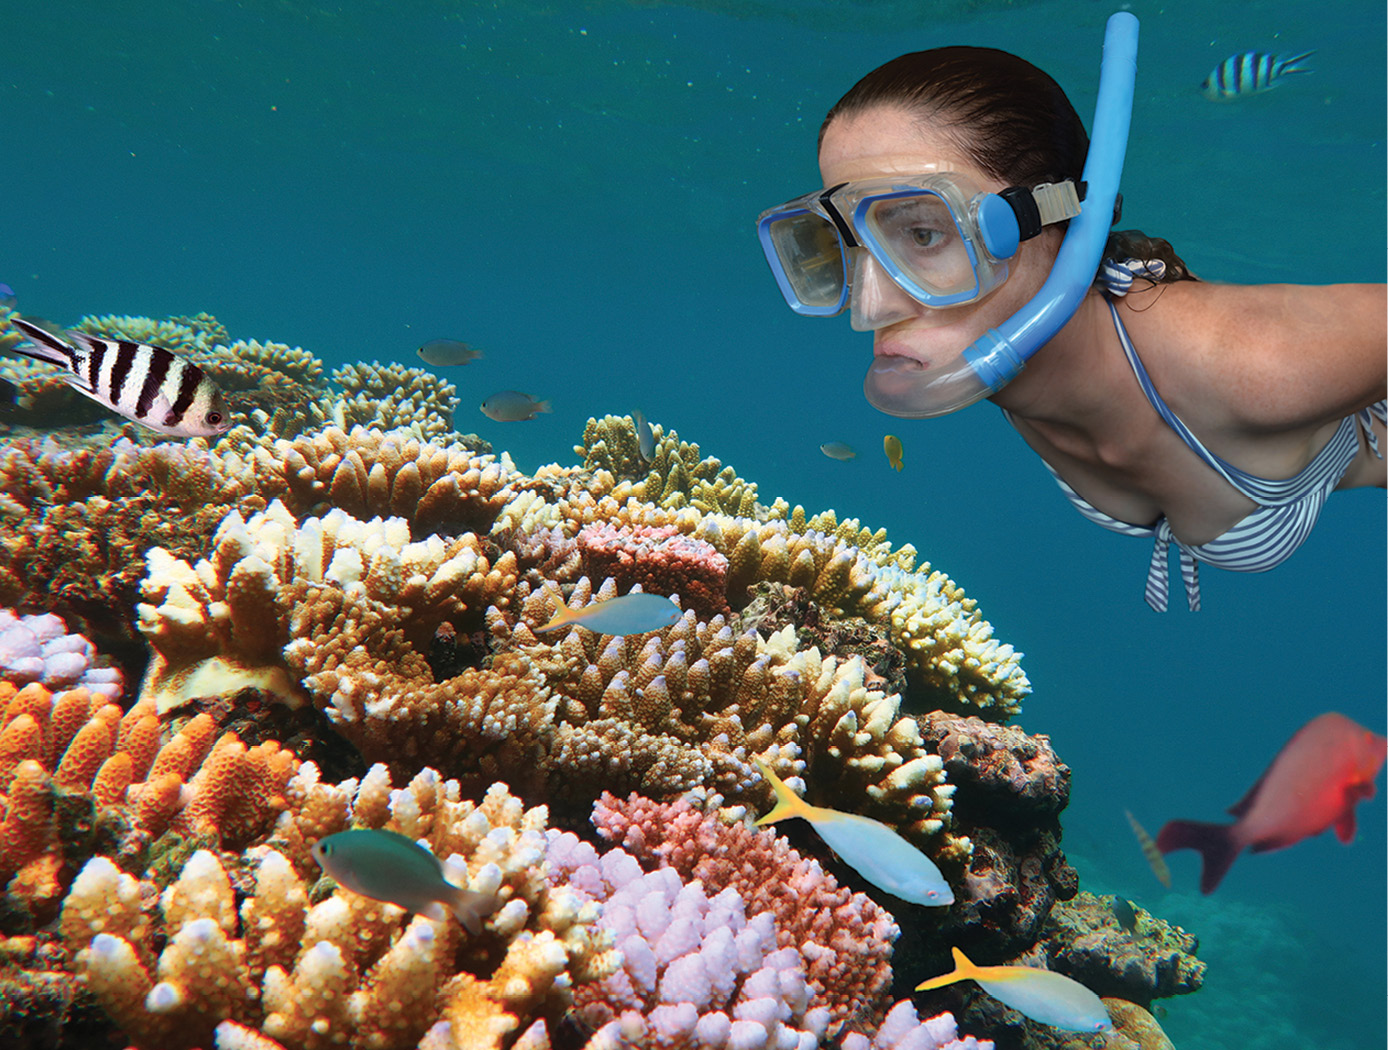 Snorkeling or diving the Great Barrier Reef is tops on the list for many - photo 7